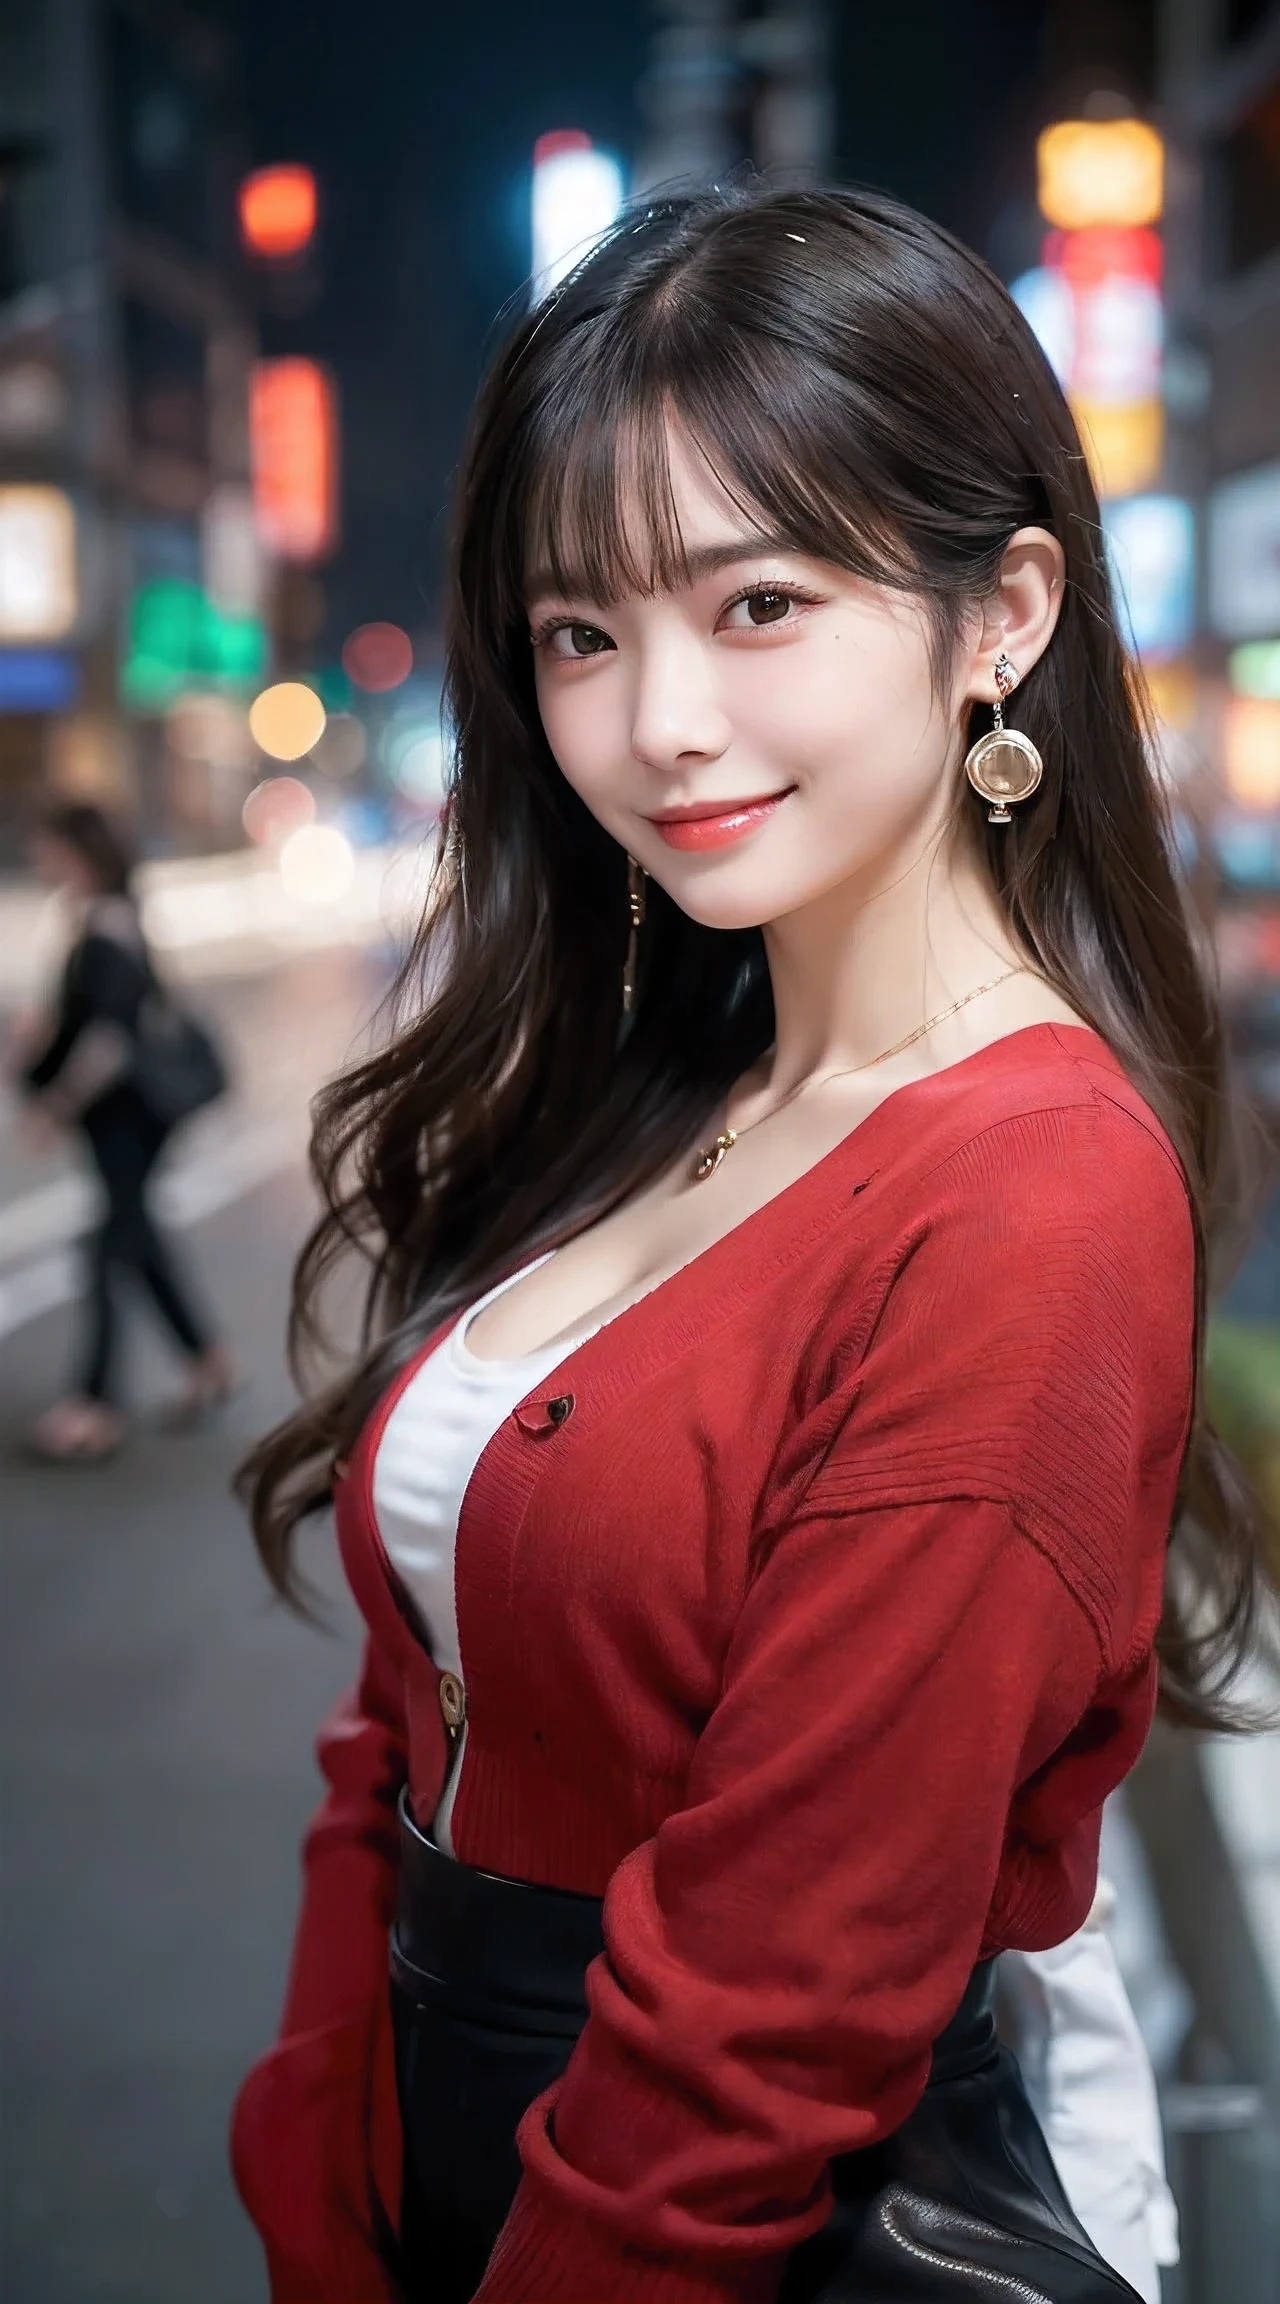 (highest quality, masterpiece:1.3, ultra high resolution), (Super detailed, caustics, 8k), (photorealistic:1.4, RAW shooting), 1 girl, (look at the camera with a smile and visible teeth), 20-year-old, cute, Japanese, (long black bronde hair), Natural lips, (wearing Blouse, Red pumps with high heels, Wide pants, Red cardigan, Business Casual Fashion：1.6), (there are earring holes on the ears), (wearing necklace by chanel), perfect necklace, cleavage, (Street in Tokyo at night), bust up shot, face focus, Natural light, Backlight, (A bright light shines from above), (Lens flare), professional writing, perfect bodies, perfect arms, Perfect fingers, perfect legs, perfect hair, pores, Realistic skin texture, perfect teeth, full body